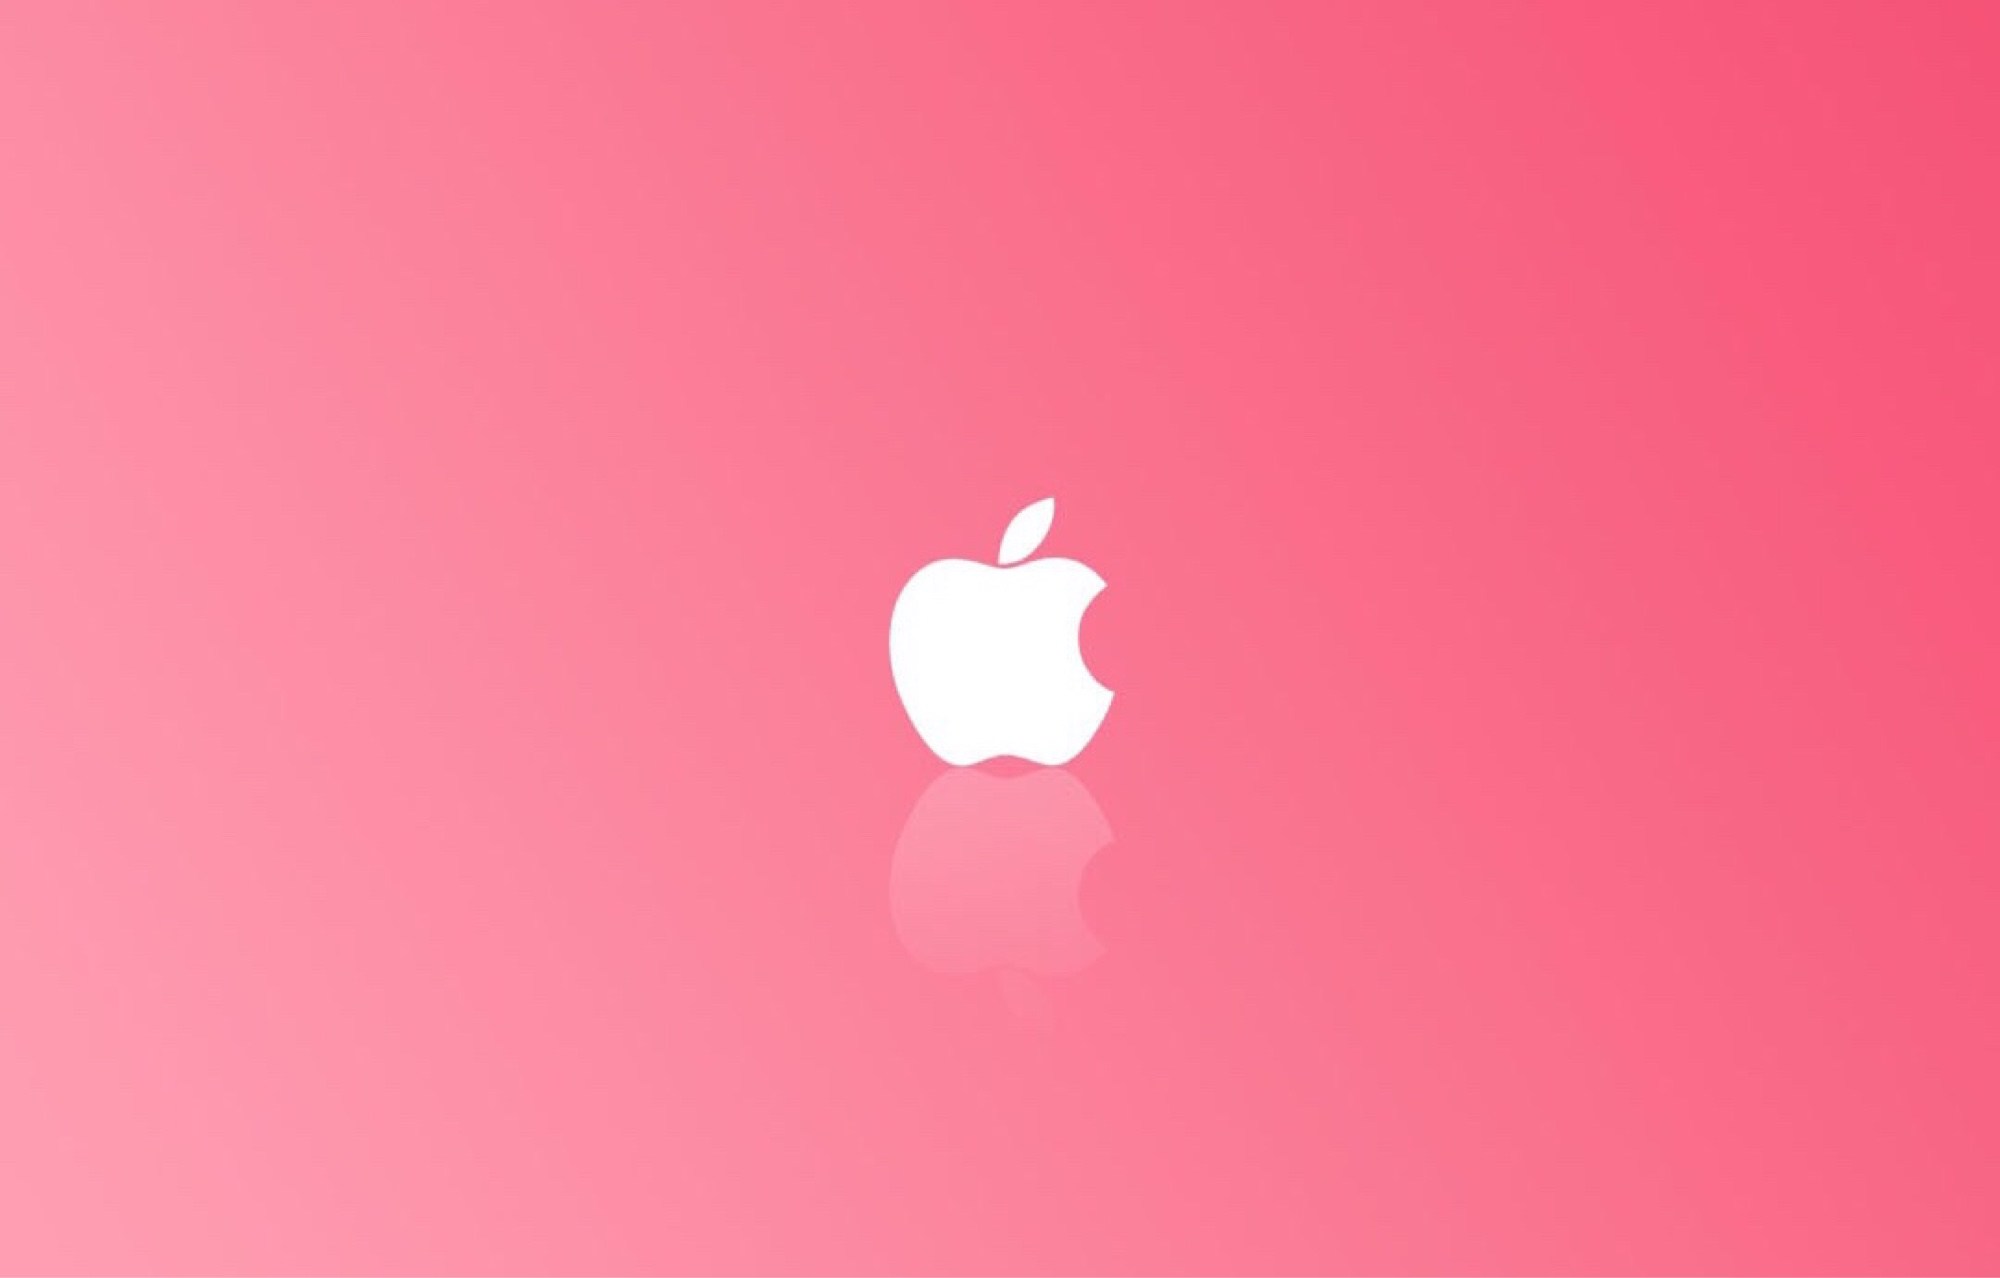 Wallpaper Apple Macbook Pink Red Heart Background  Download Free Image